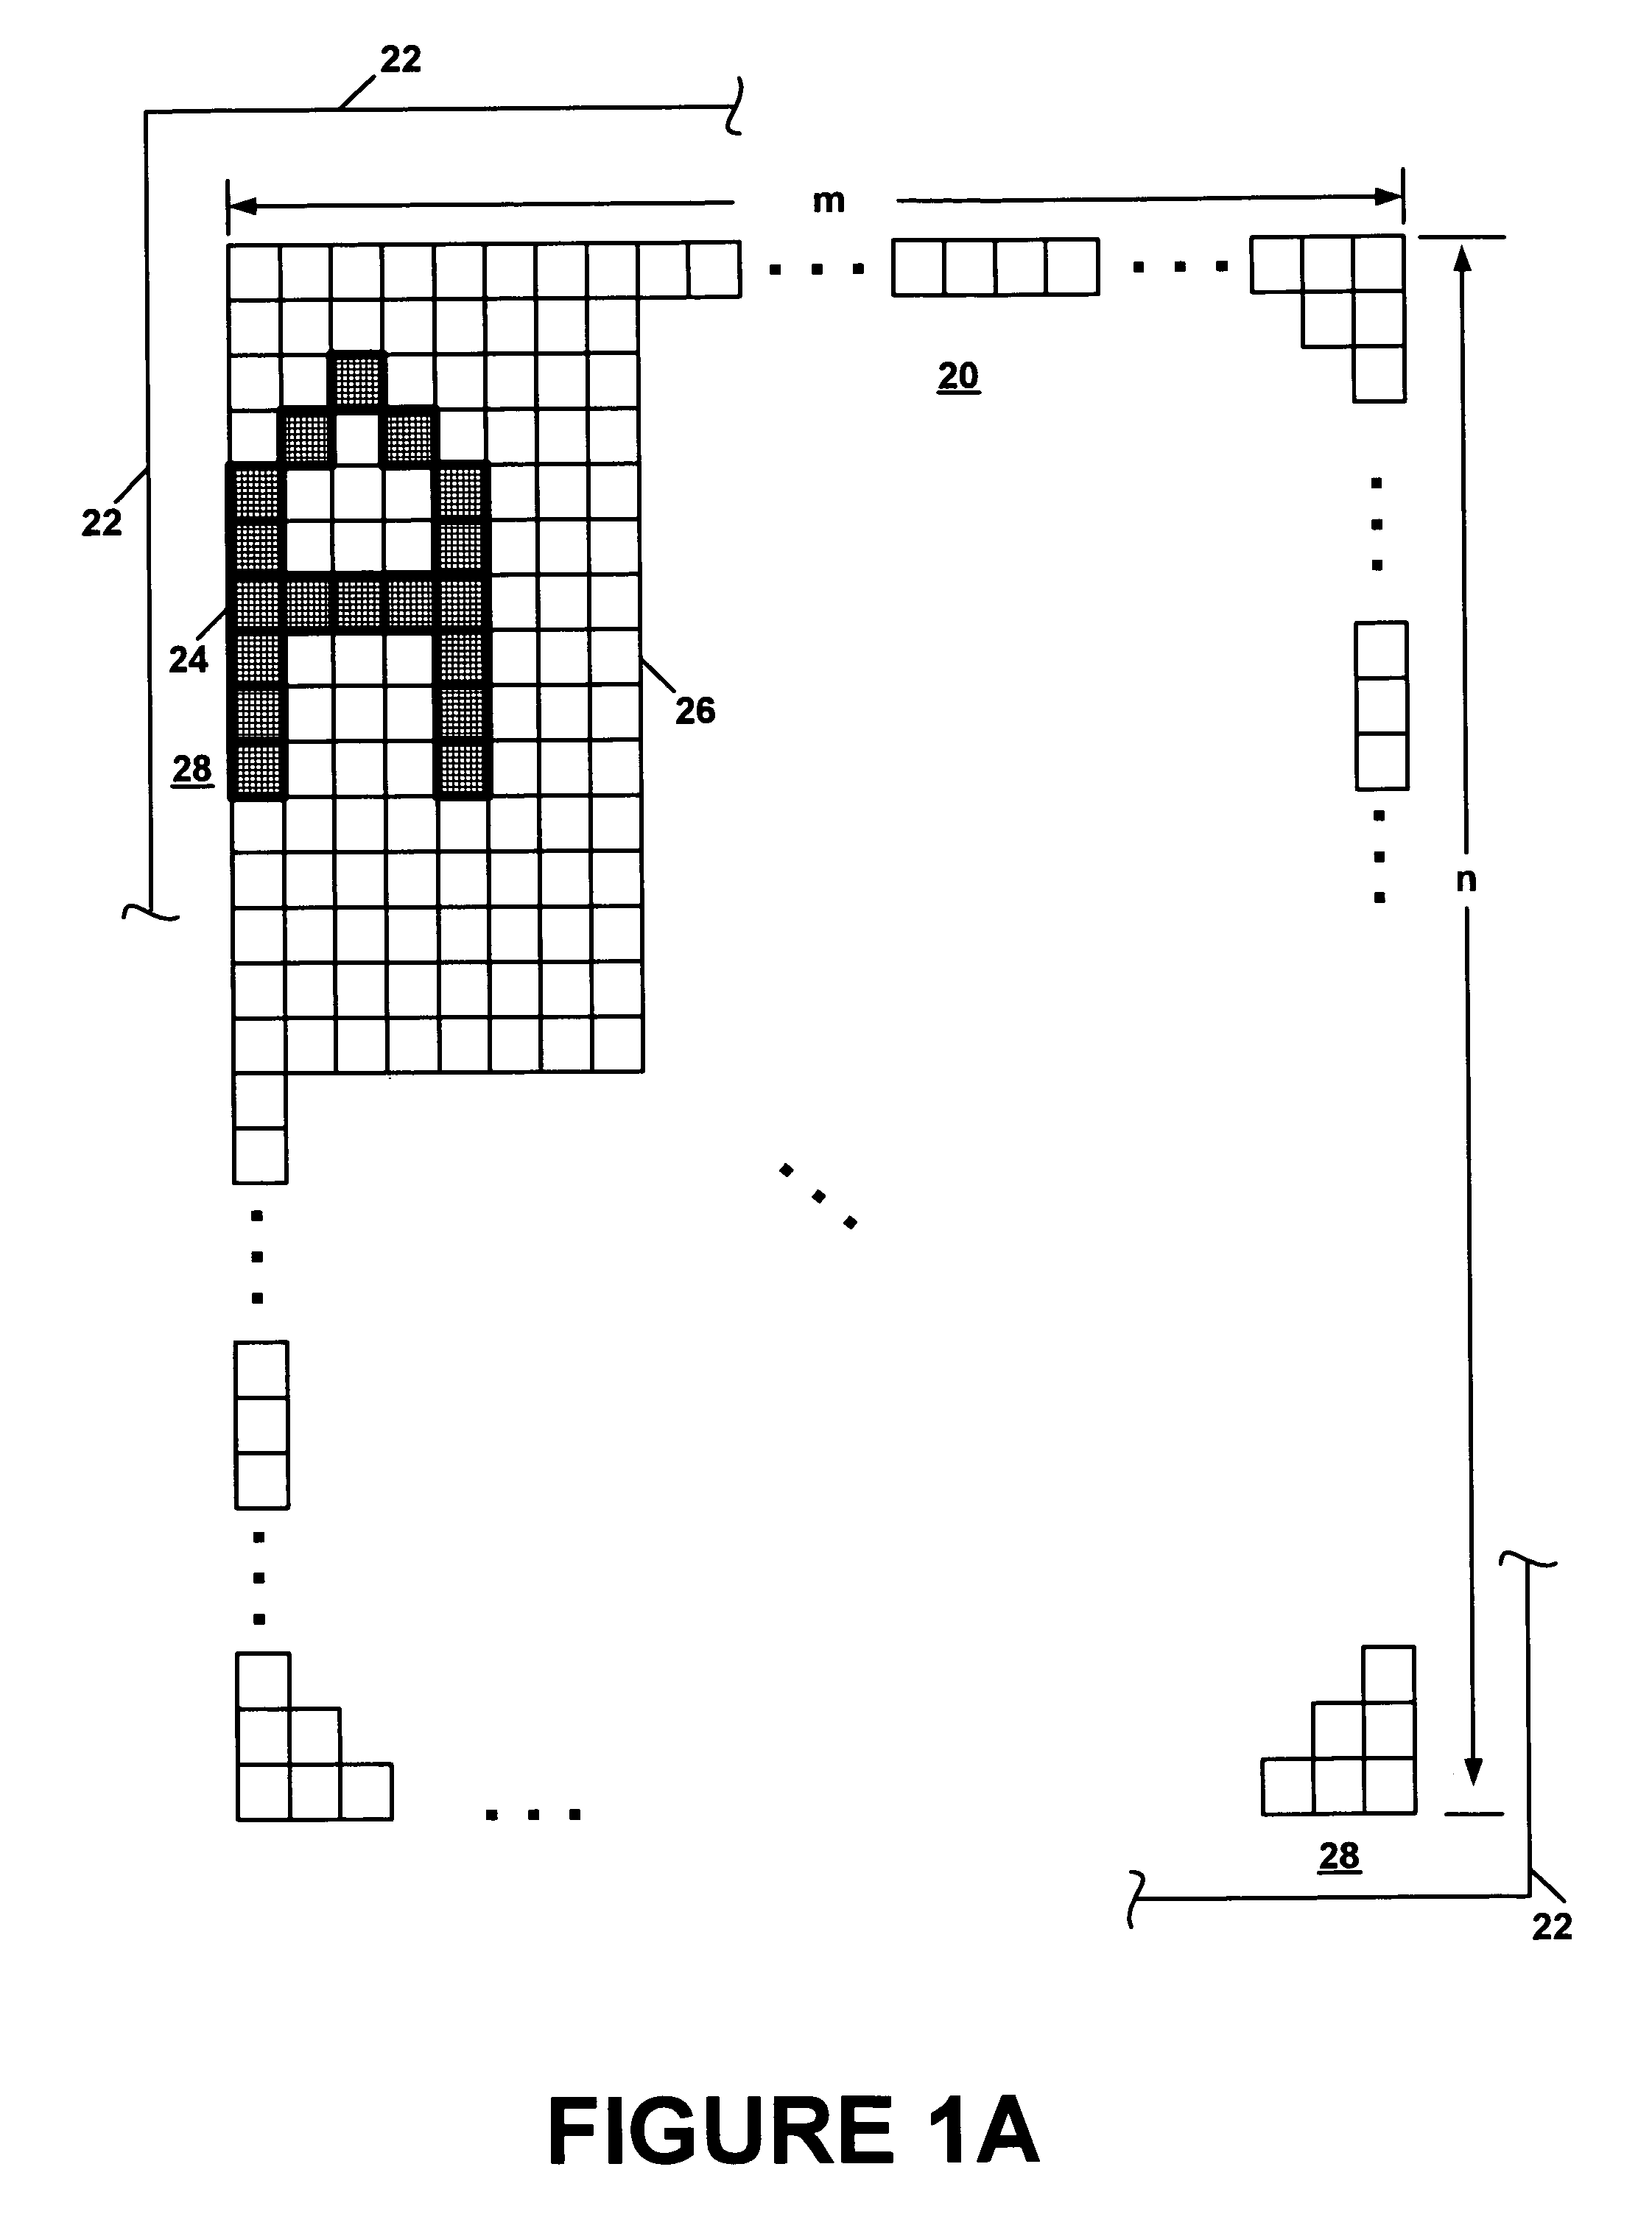 Pixel border for improved viewability of a display device